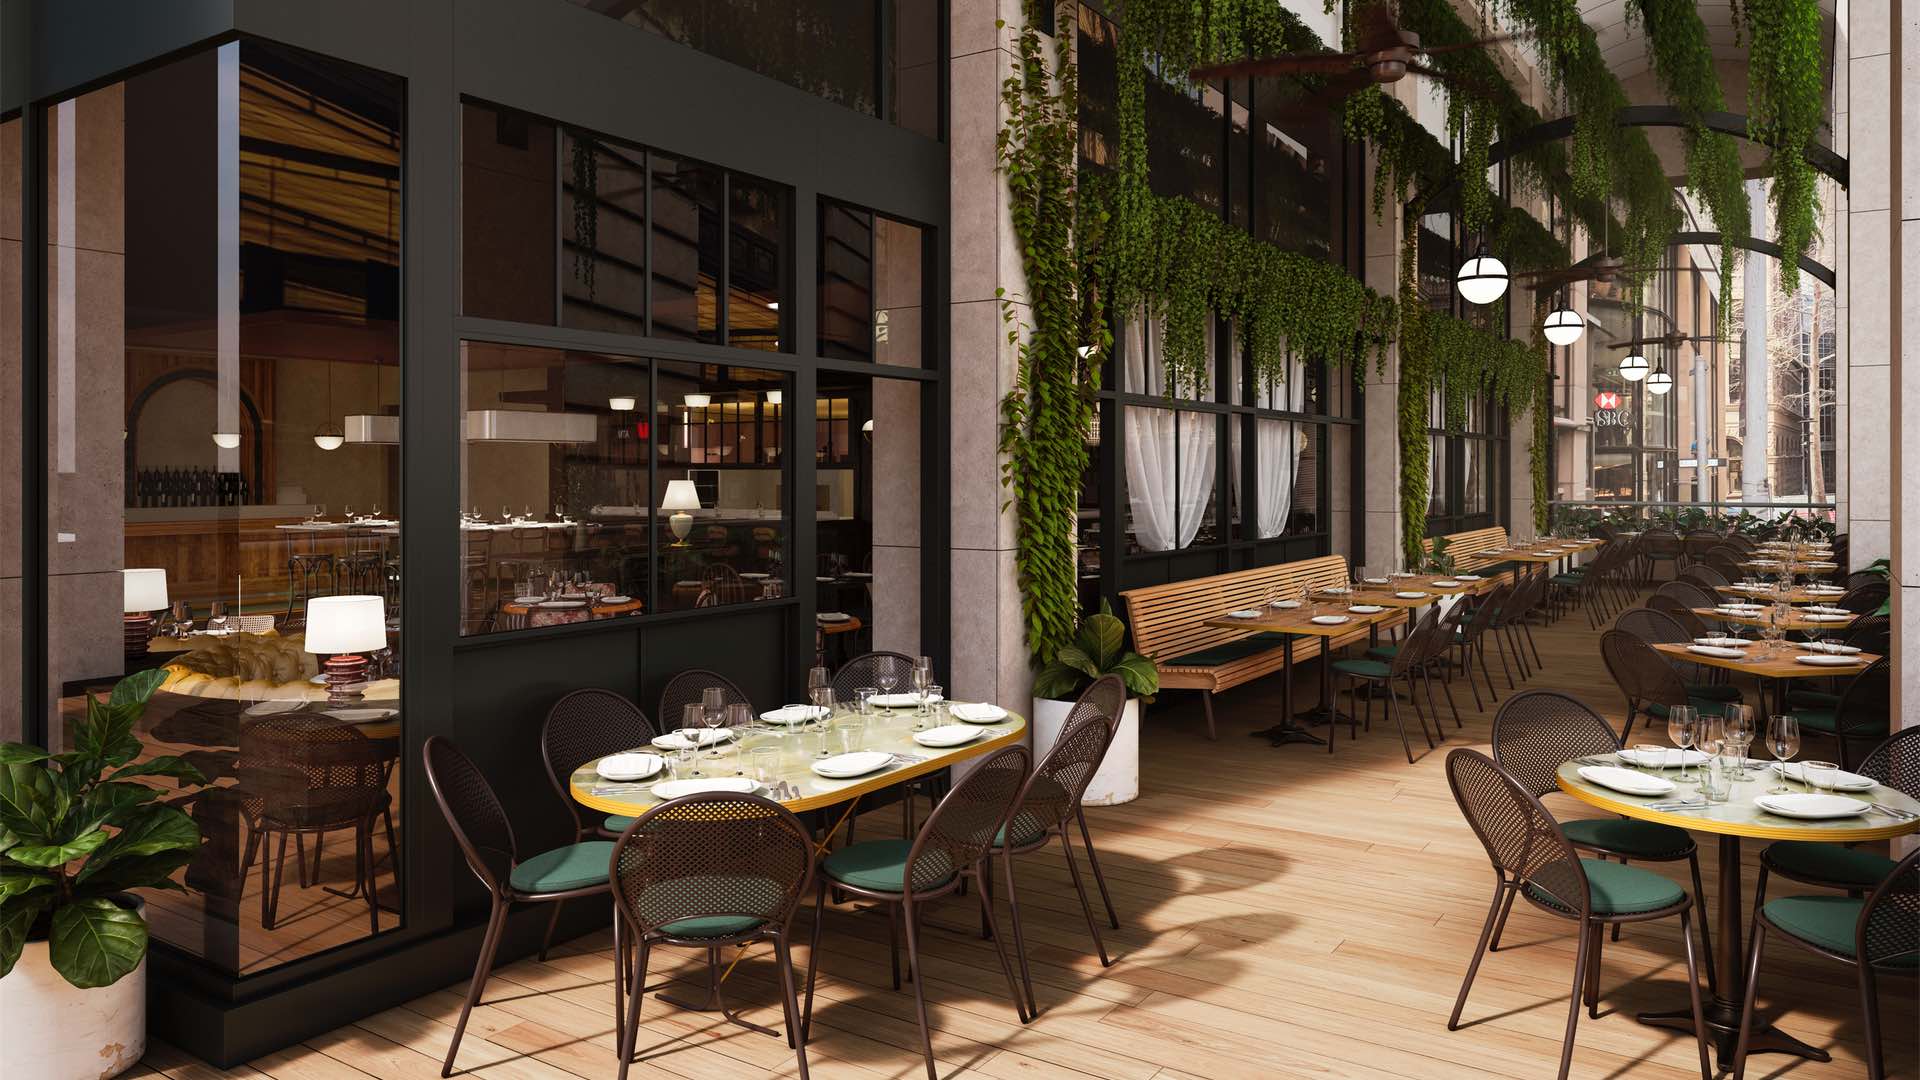 Bopp & Tone Is Sydney CBD's Elegant New Bar and Eatery Inspired by the Post-WWII Era